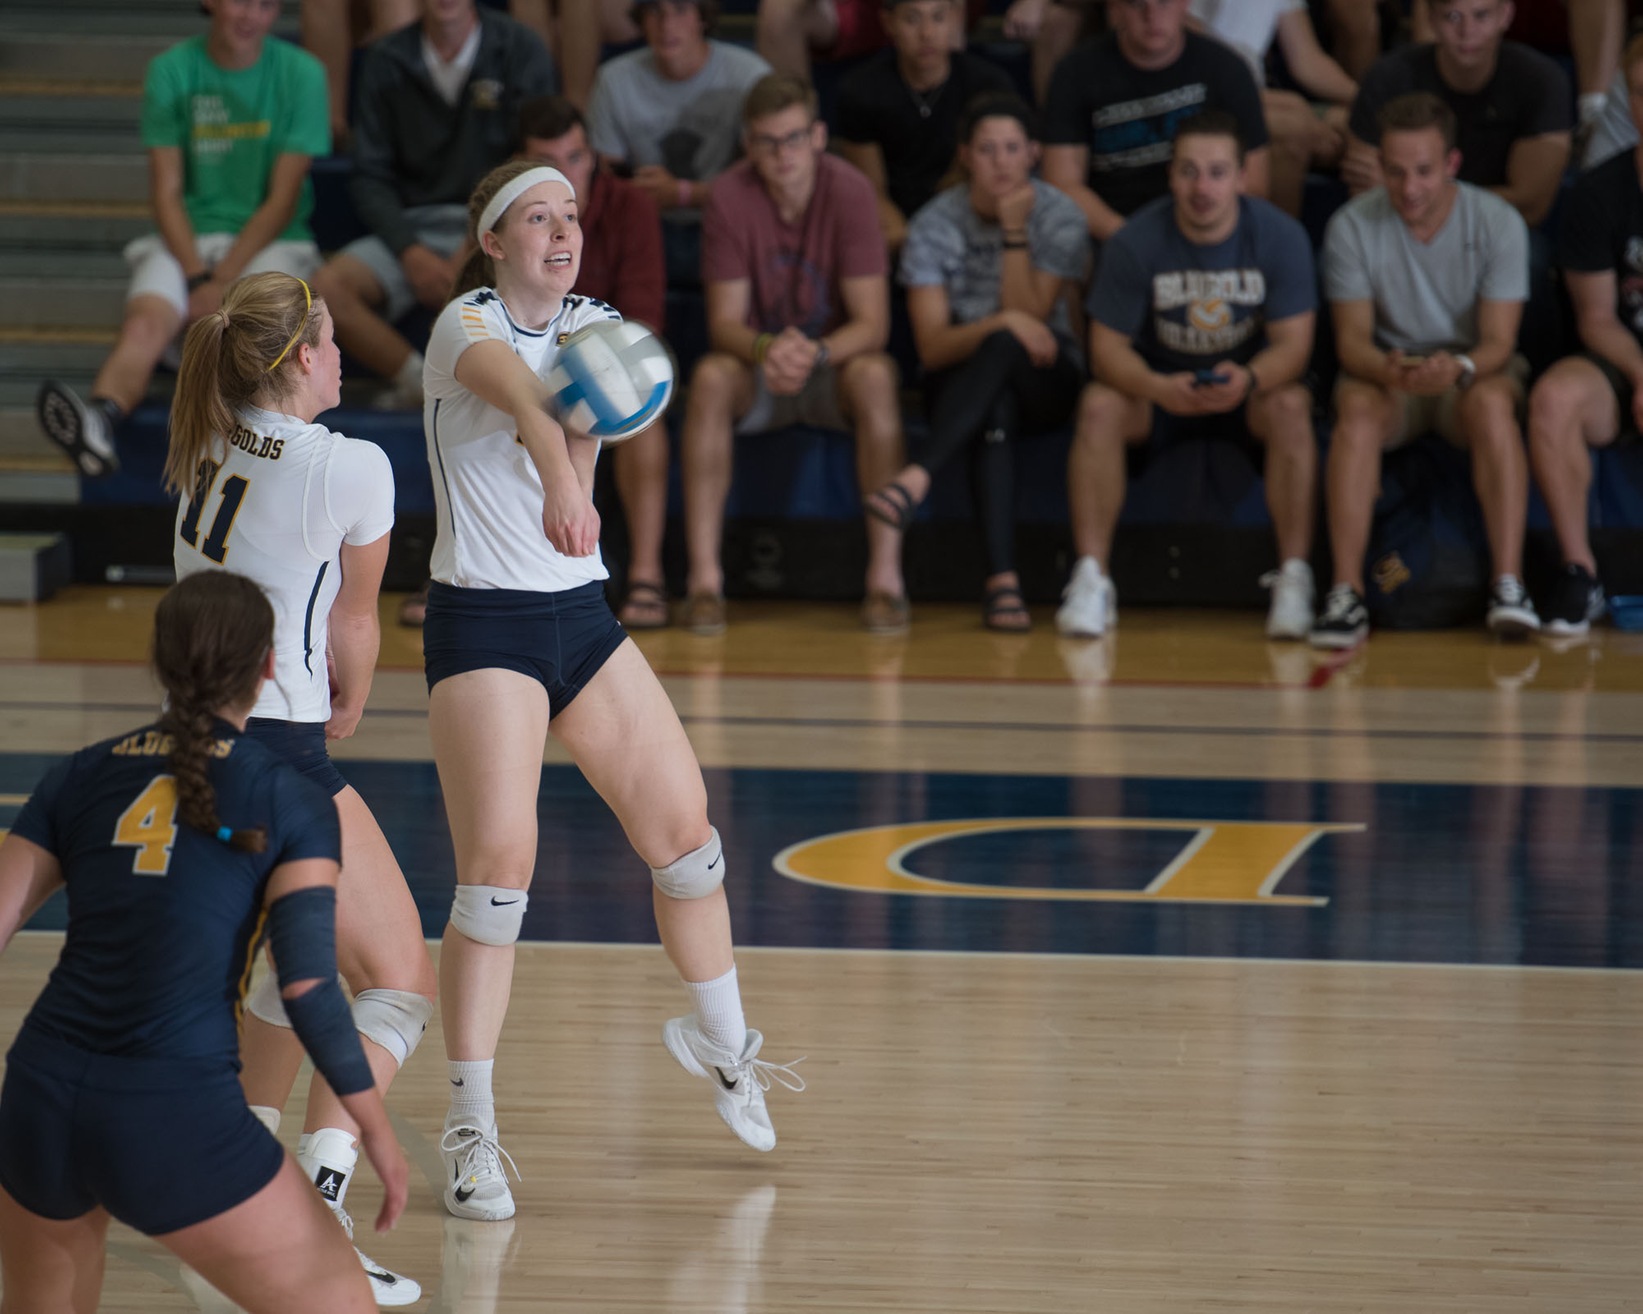 Eau Claire volleyball sweeps Platteville to move to 2-0 in WIAC